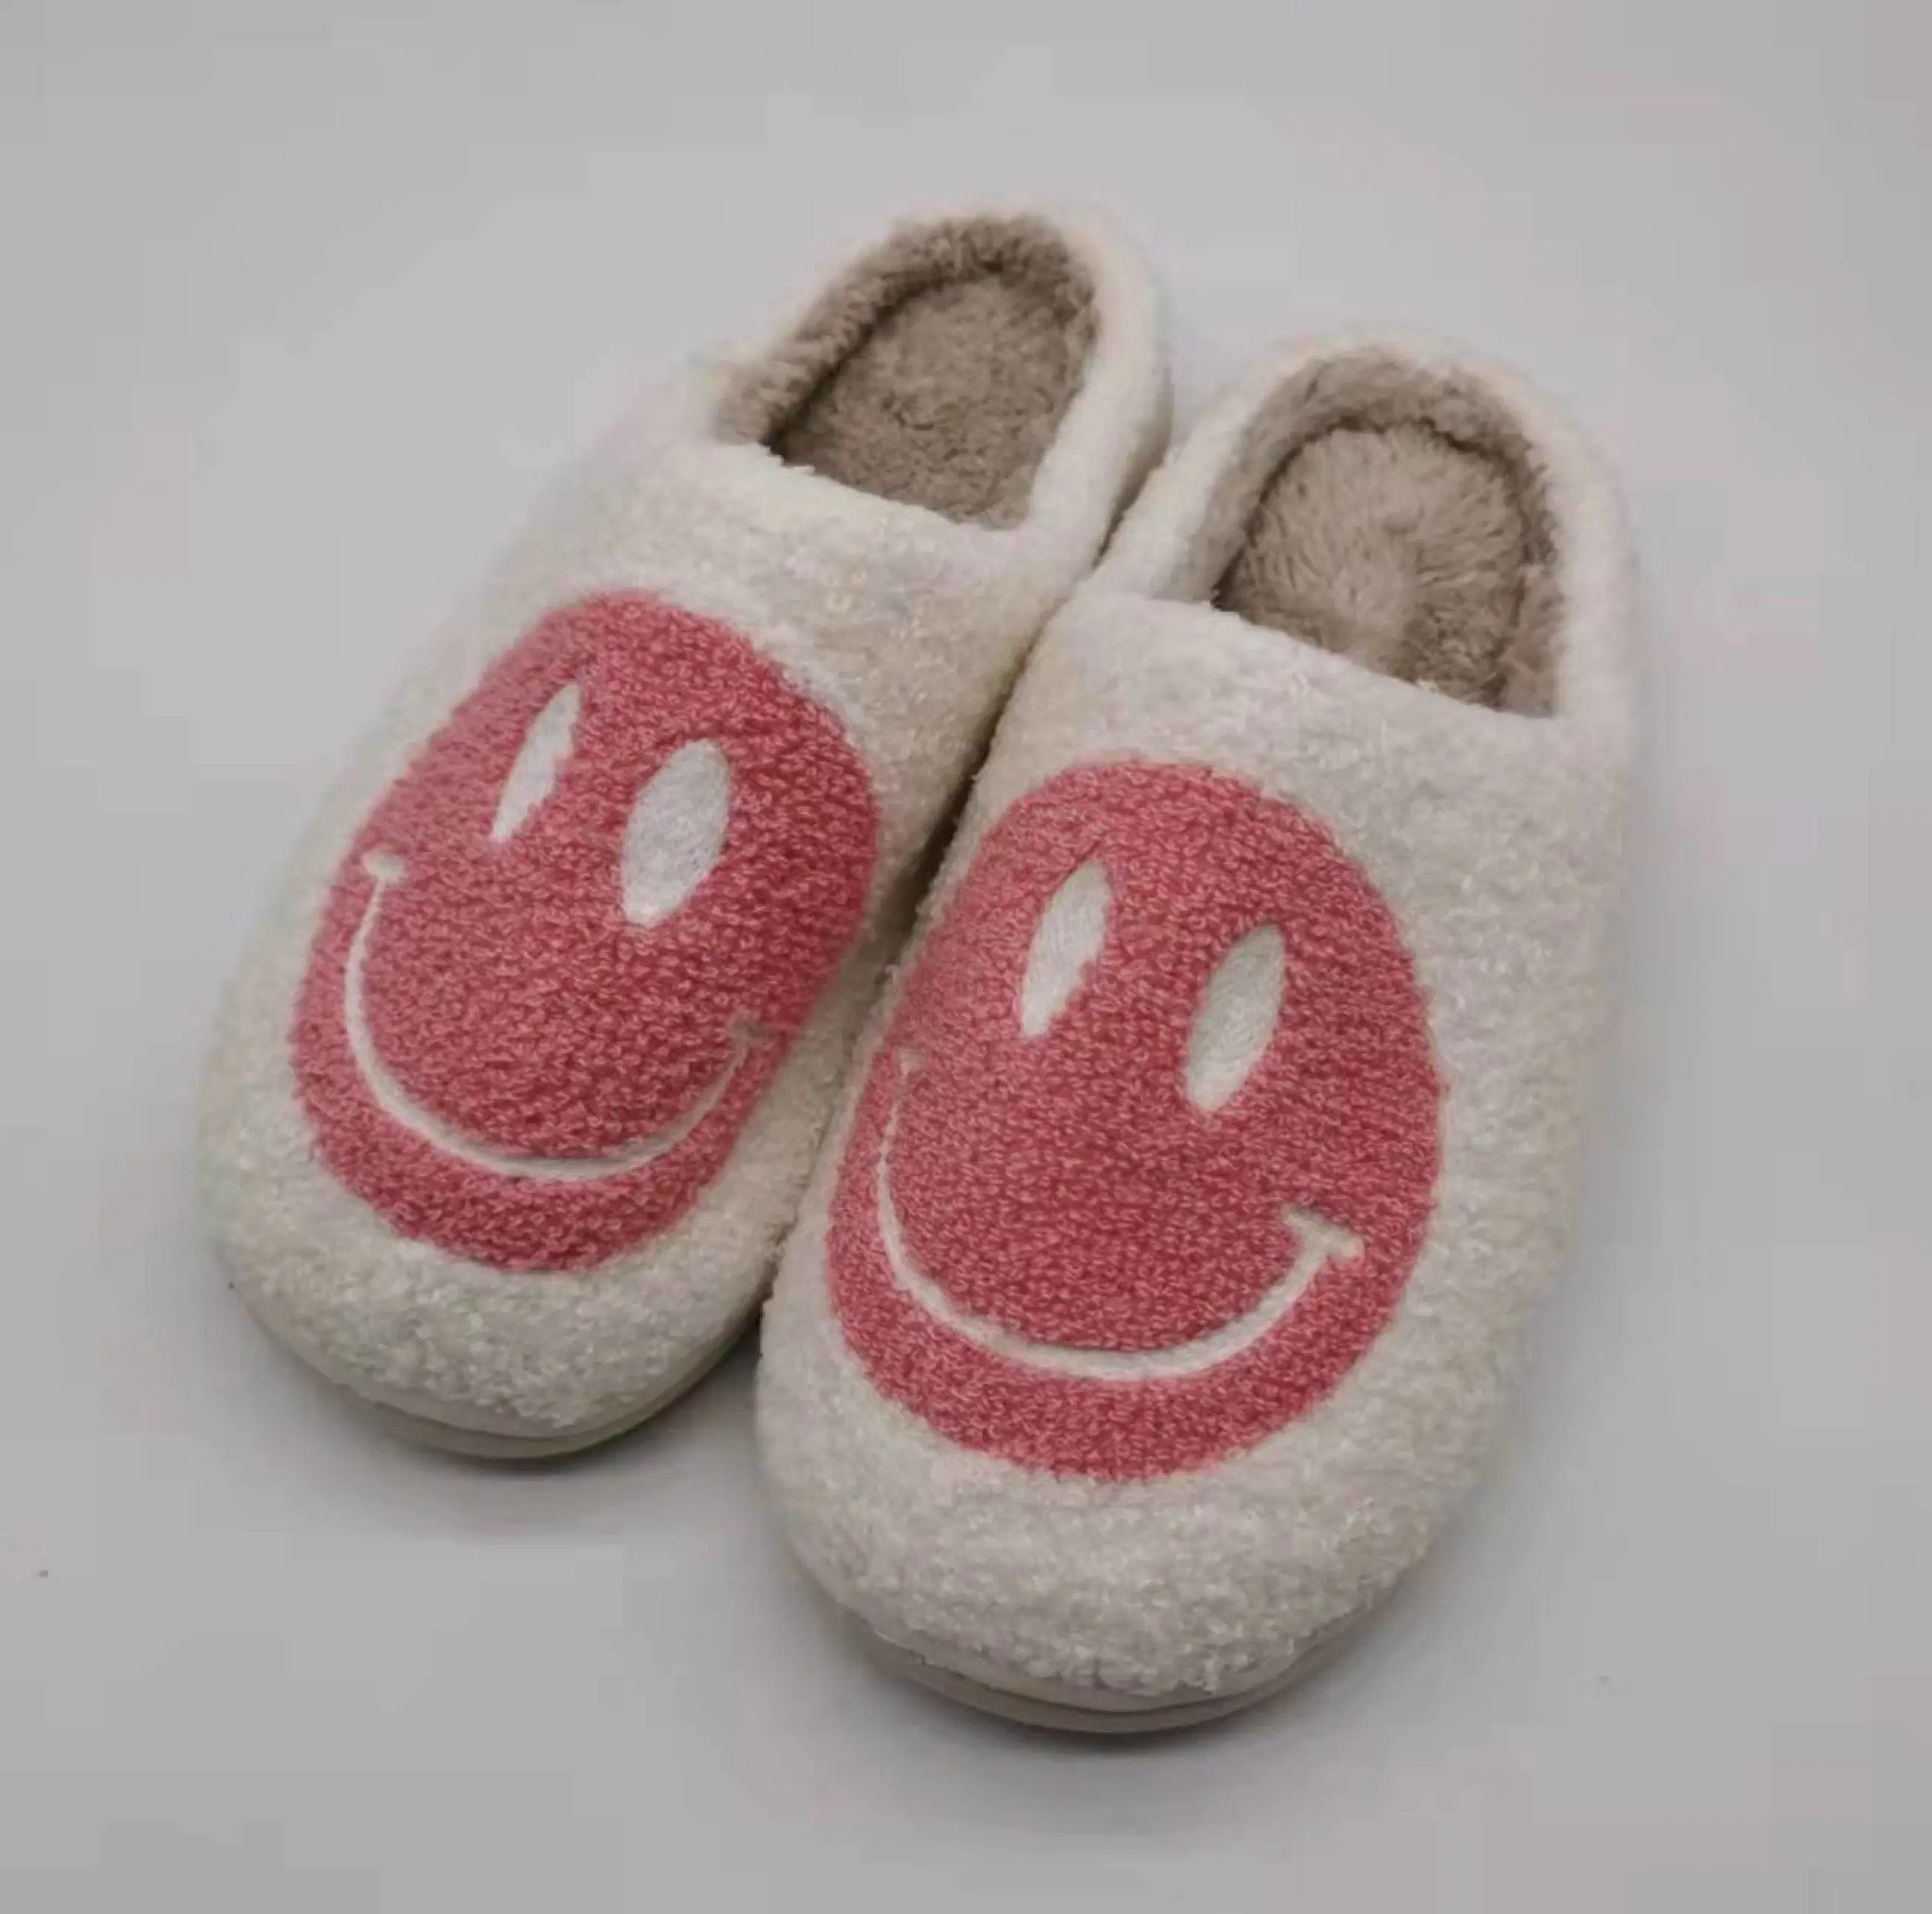 Smile Winter Slippers Soft Plush Artificial Leather Shoes Lady Fluffy Fluffy Flat Home Interior